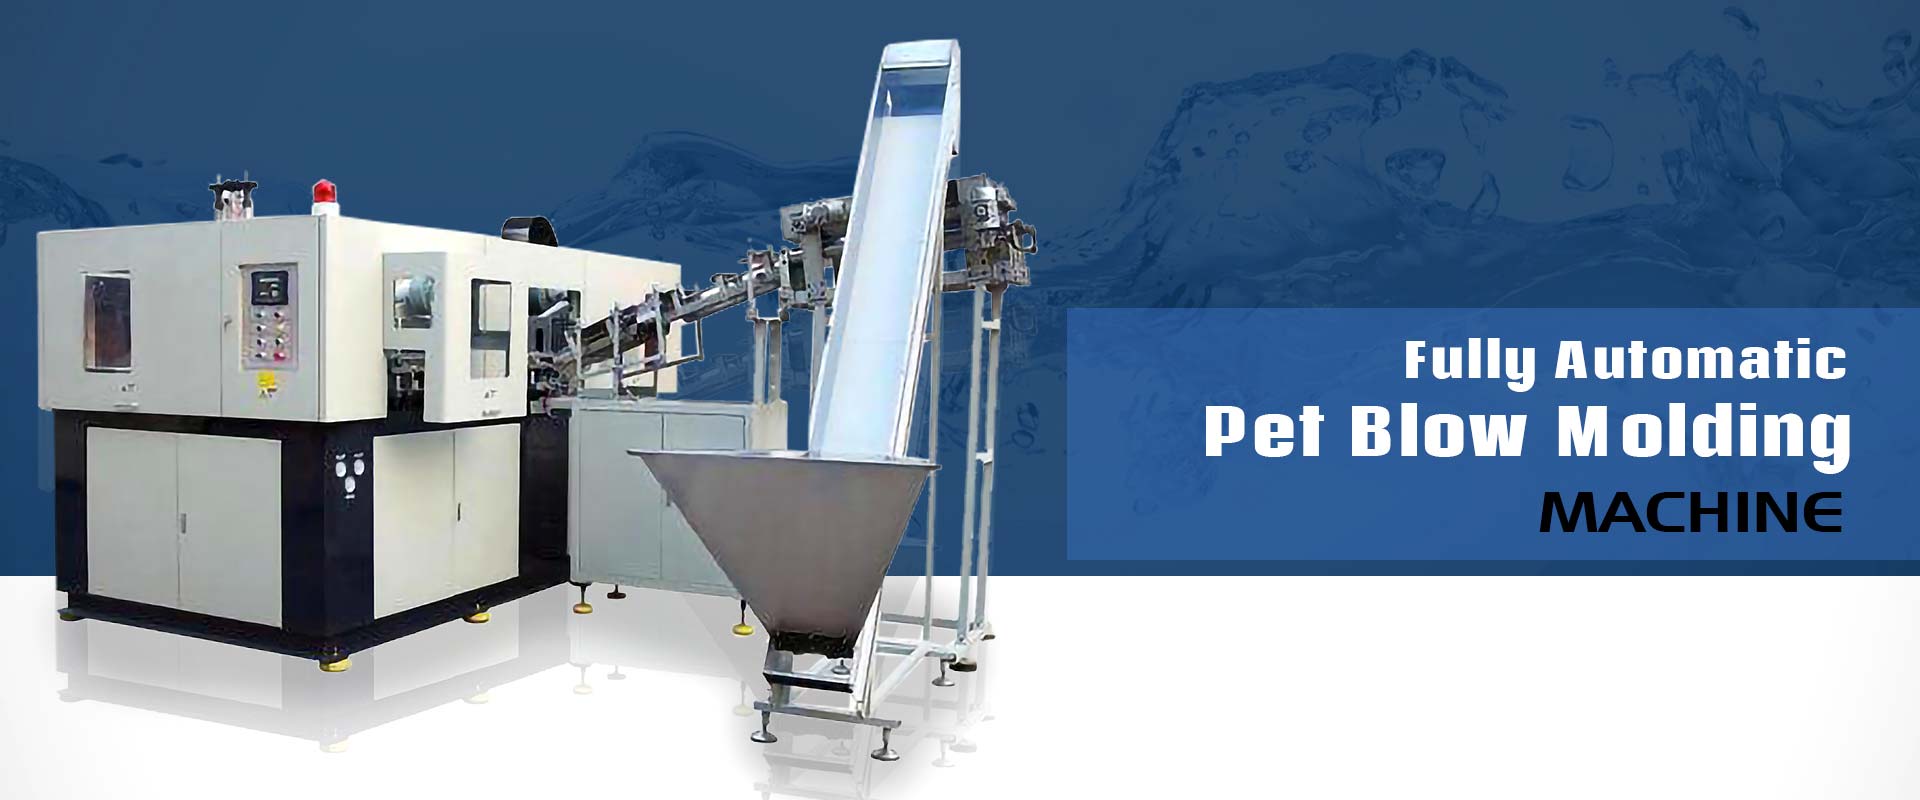 Fully Automatic Pet Blow Molding Machine In RostovonDon